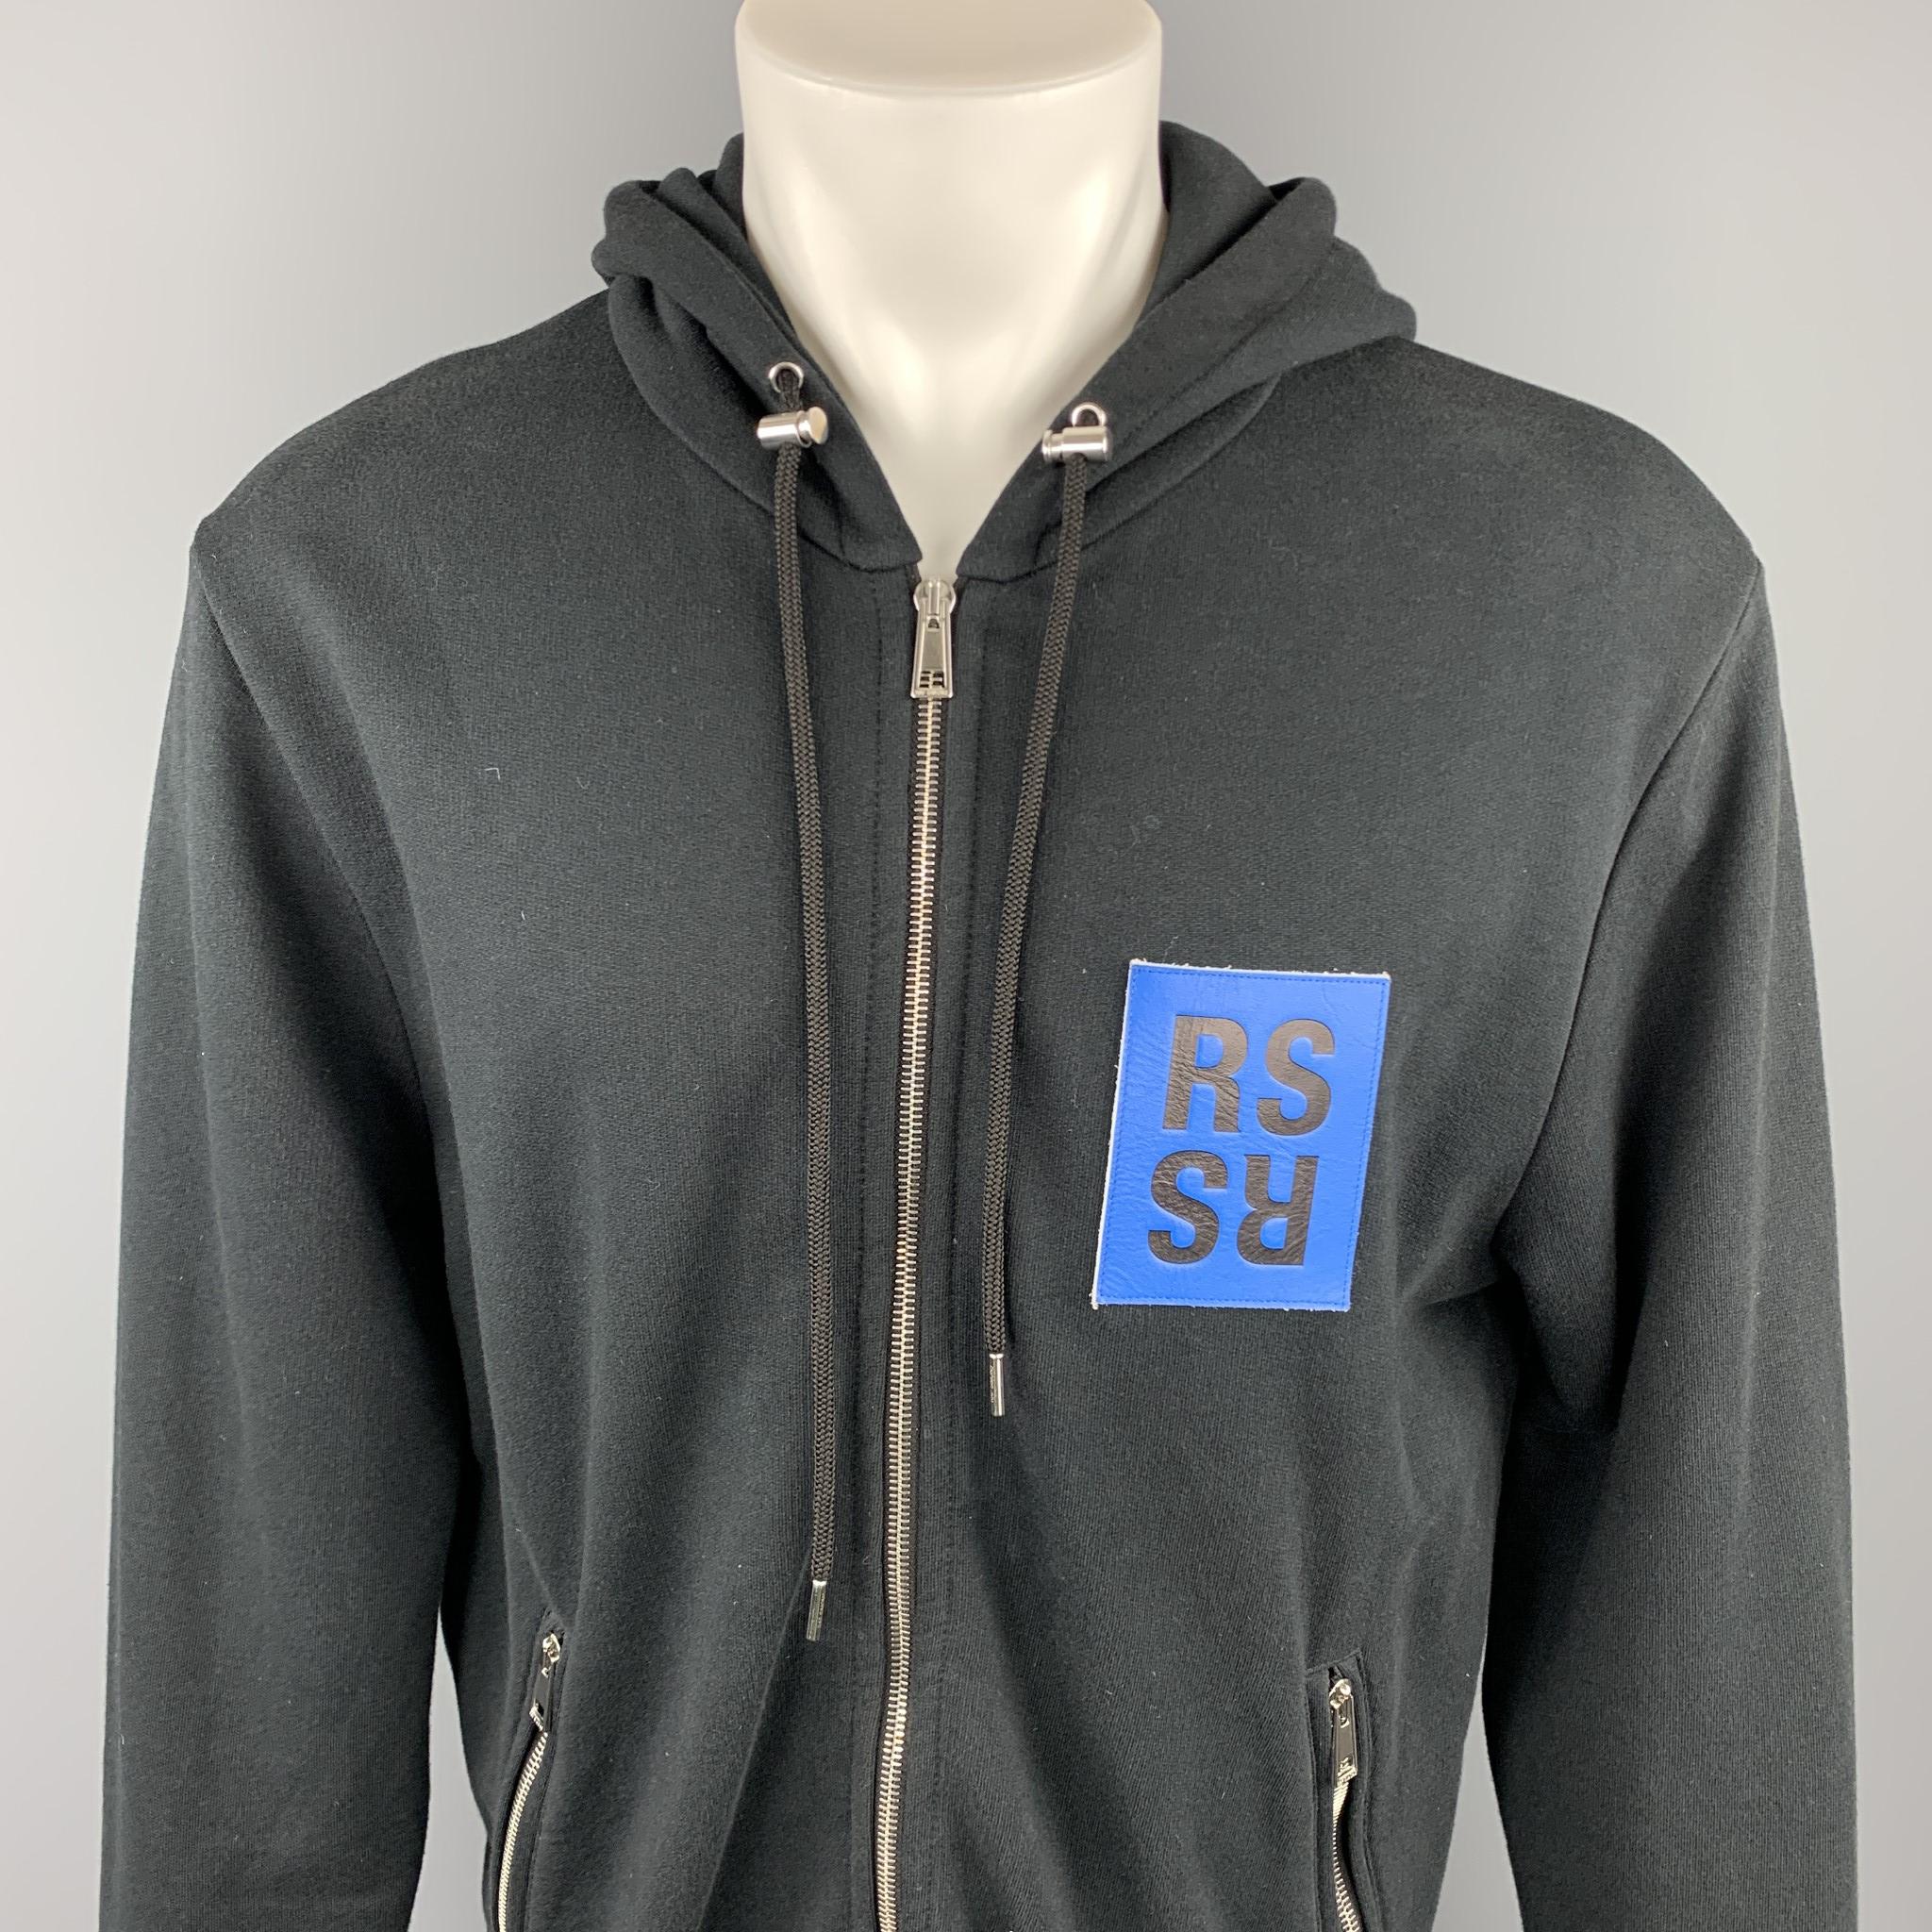 Rare, Iconic RAF SIMONS Fall 2015 - to the archives no longer relevant - newspaper with robot hand print jacket comes in a black cotton with graphic details, blue RS signature detail featuring a hooded style, zipper pockets, and a zip up closure.